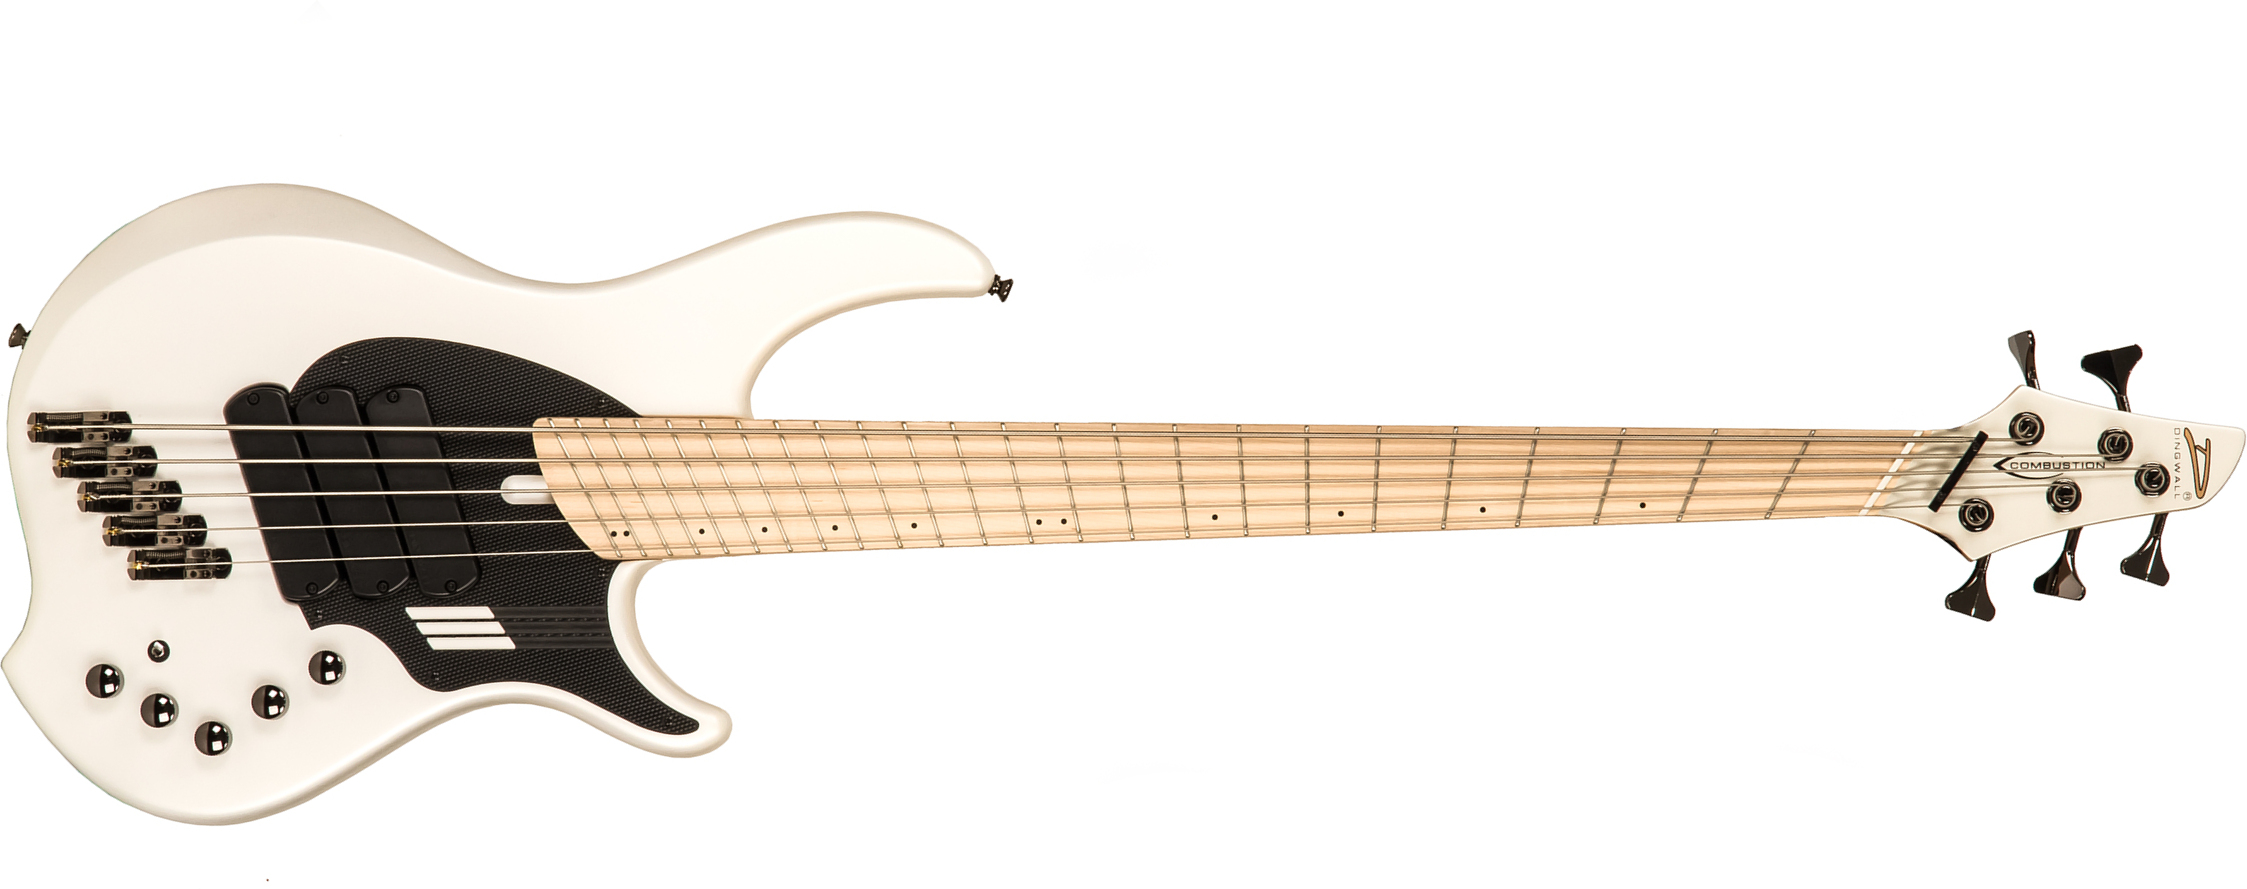 Dingwall Adam Nolly Getgood Ng3 5c Signature 3pu Active Mn - Ducati Pearl White - Solid body electric bass - Main picture